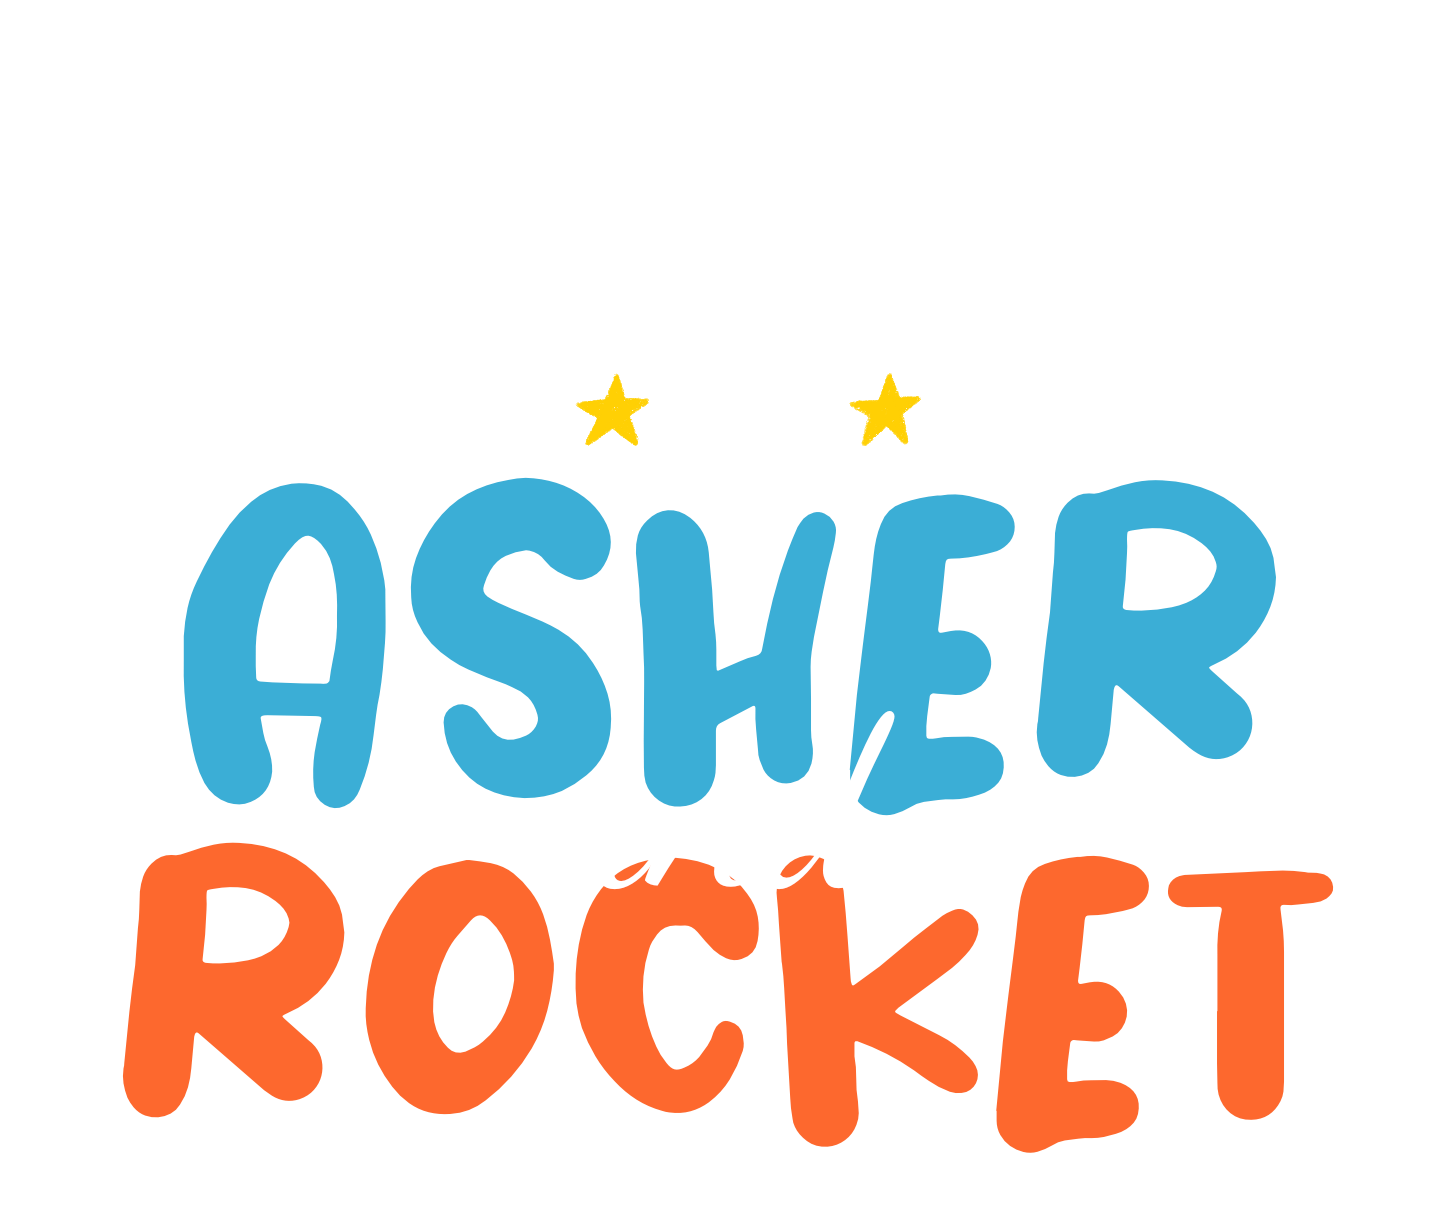 The Book cover for The Adventure of Asher and Rocket